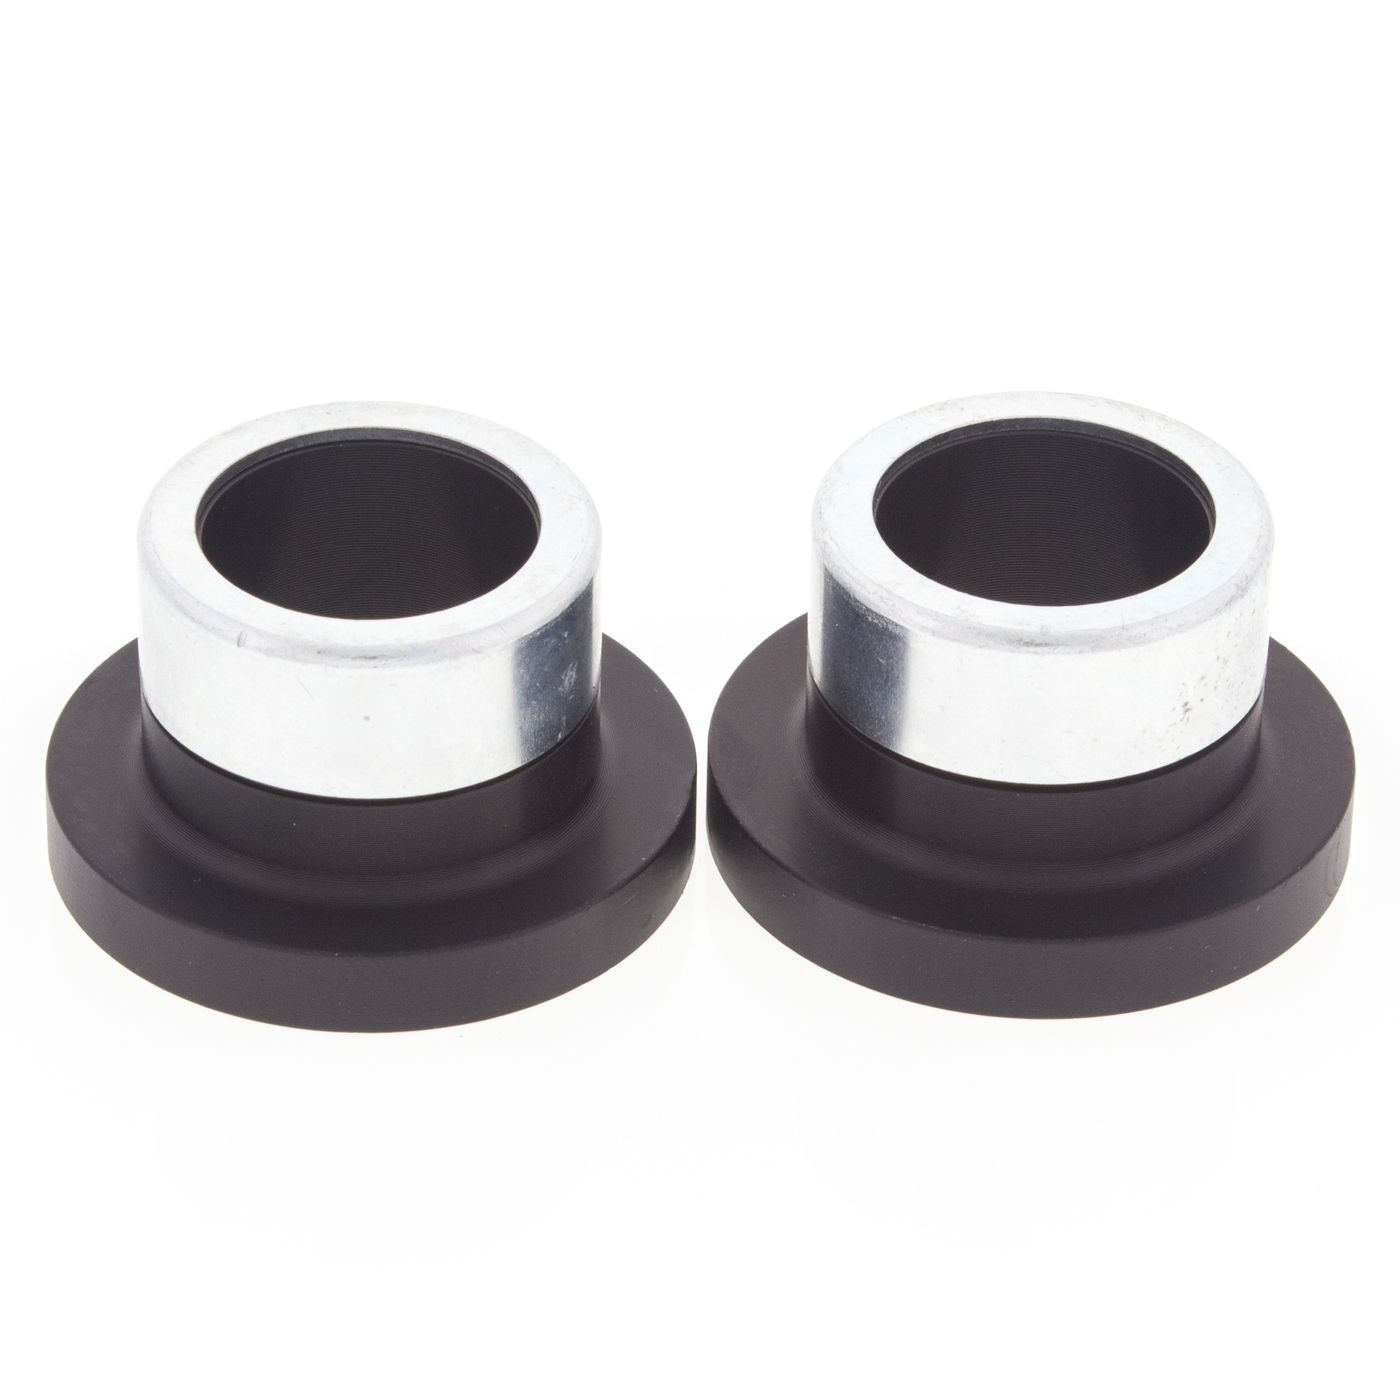 Wrp Rear Wheel Spacer Kits - WRP111093-1 image